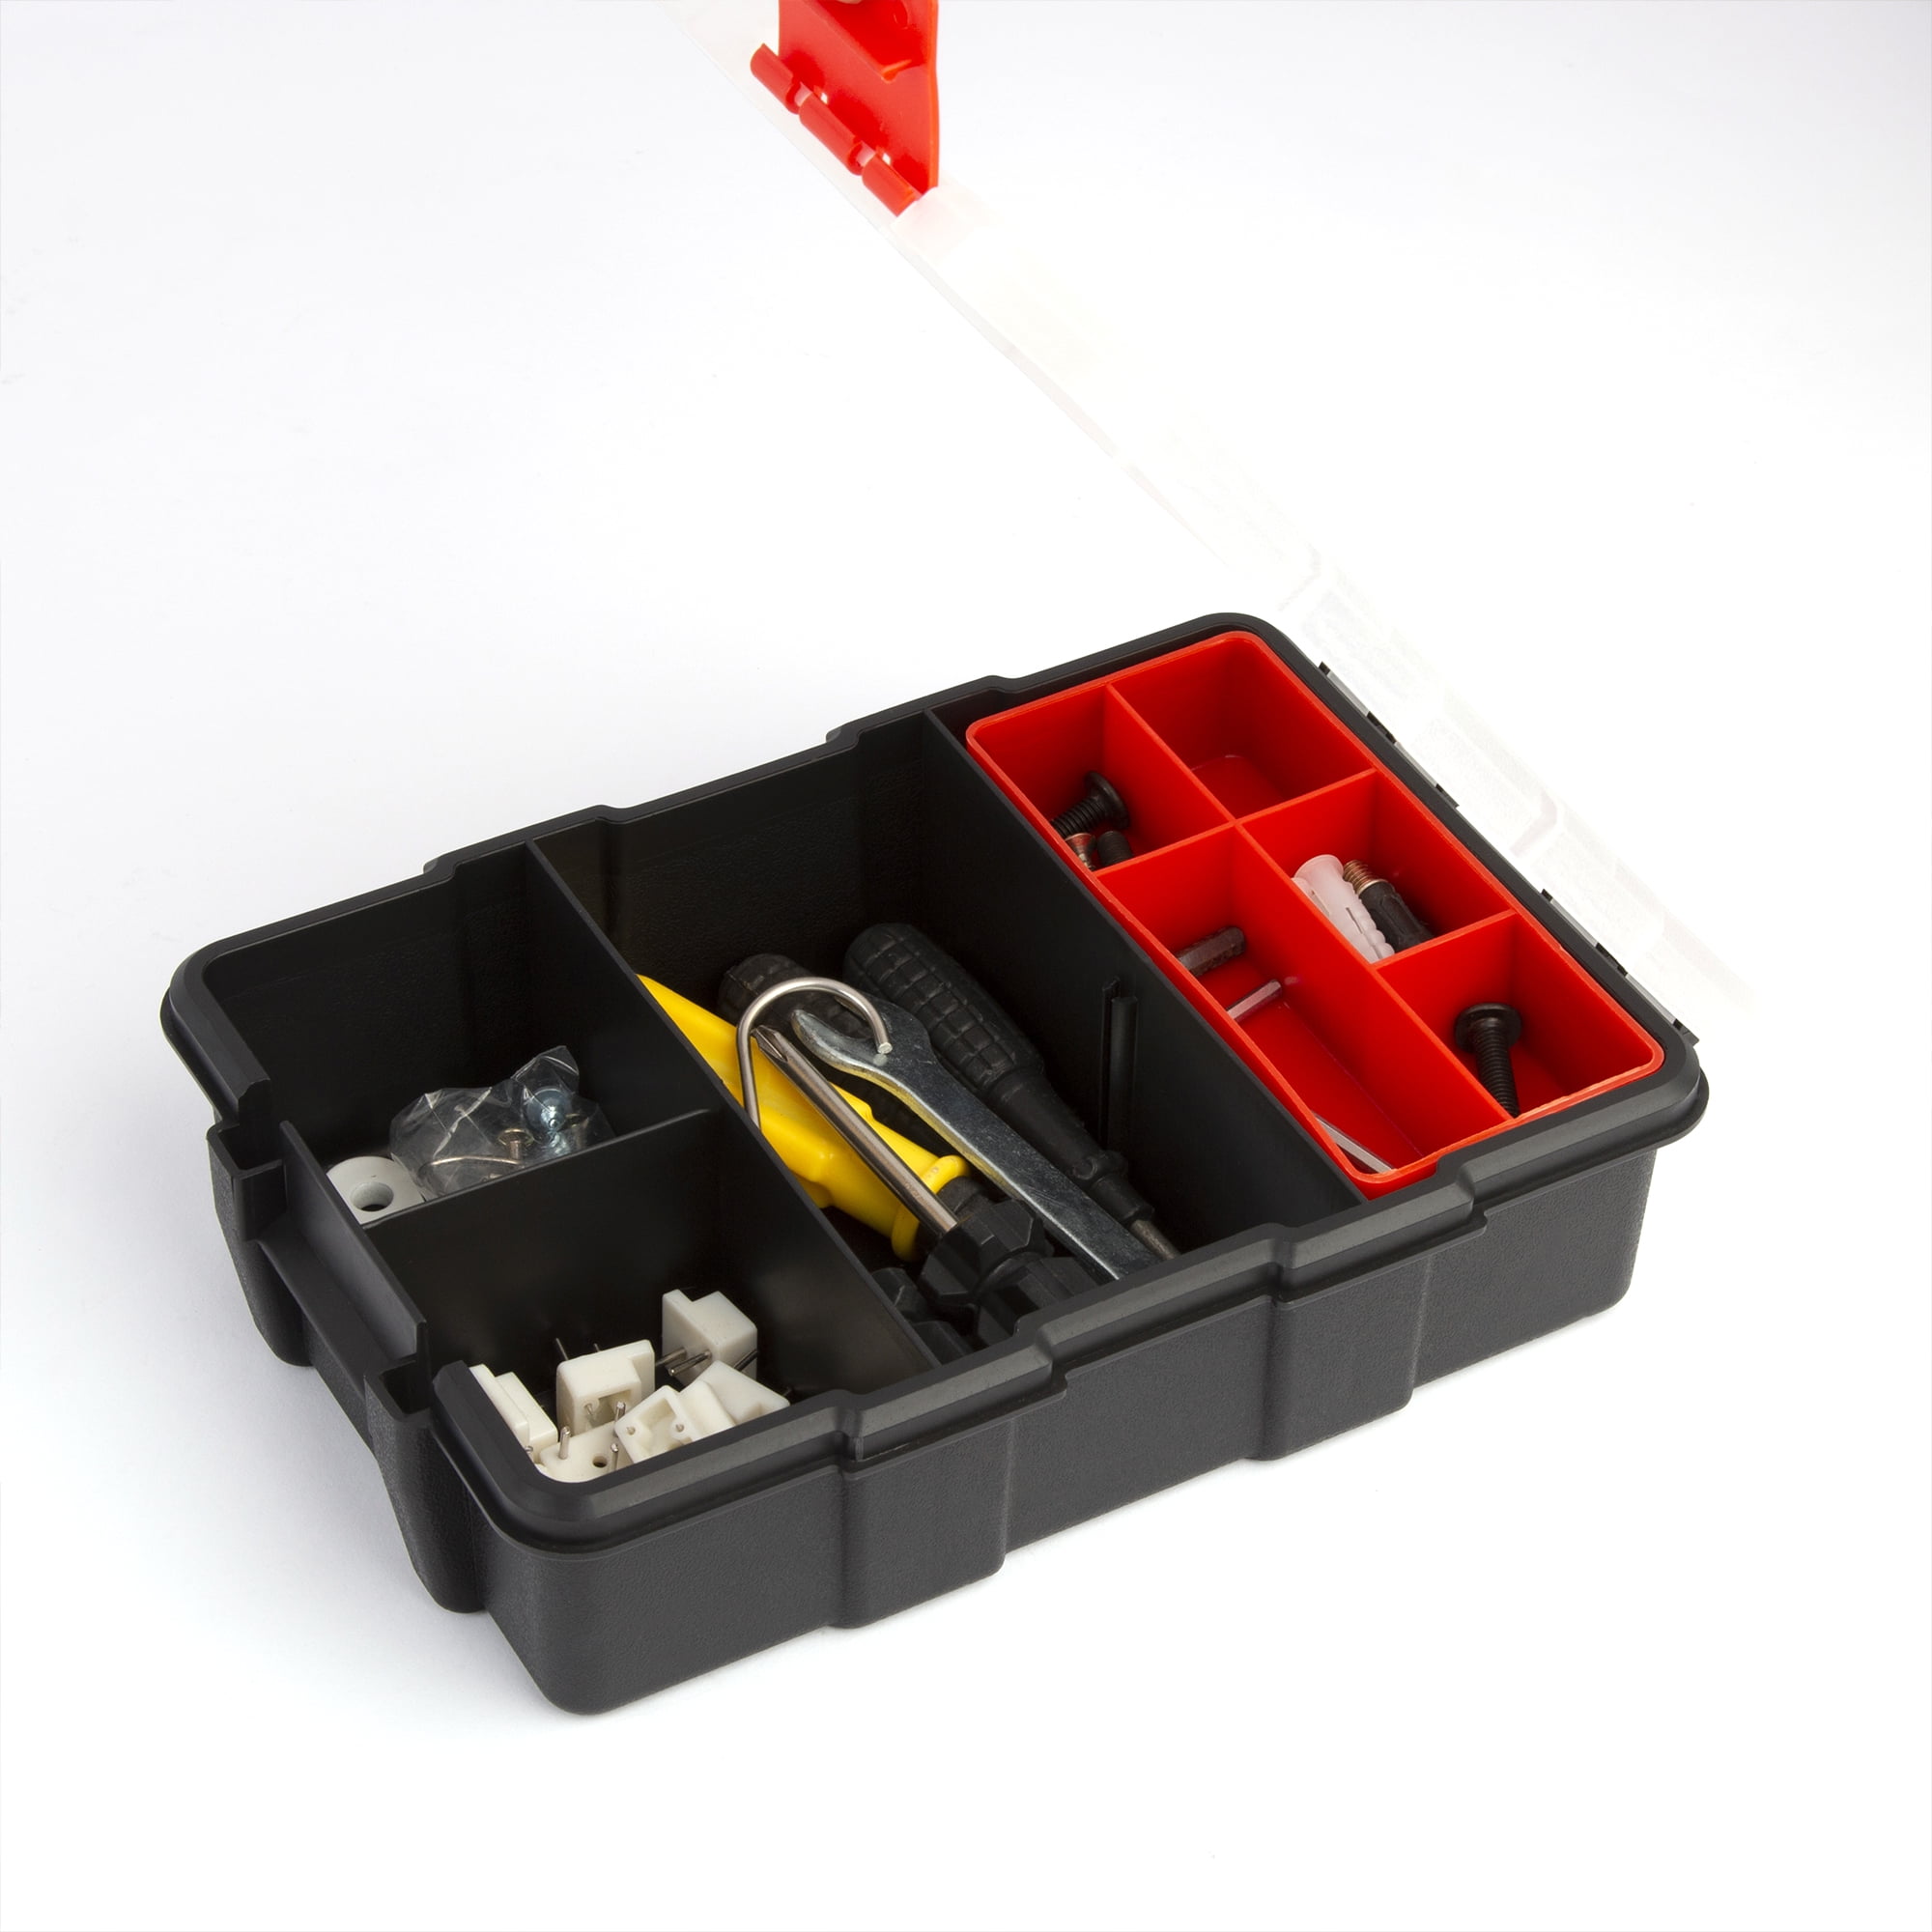 Industrial Plastic Storage Bins with Dividers for Tools Hardware